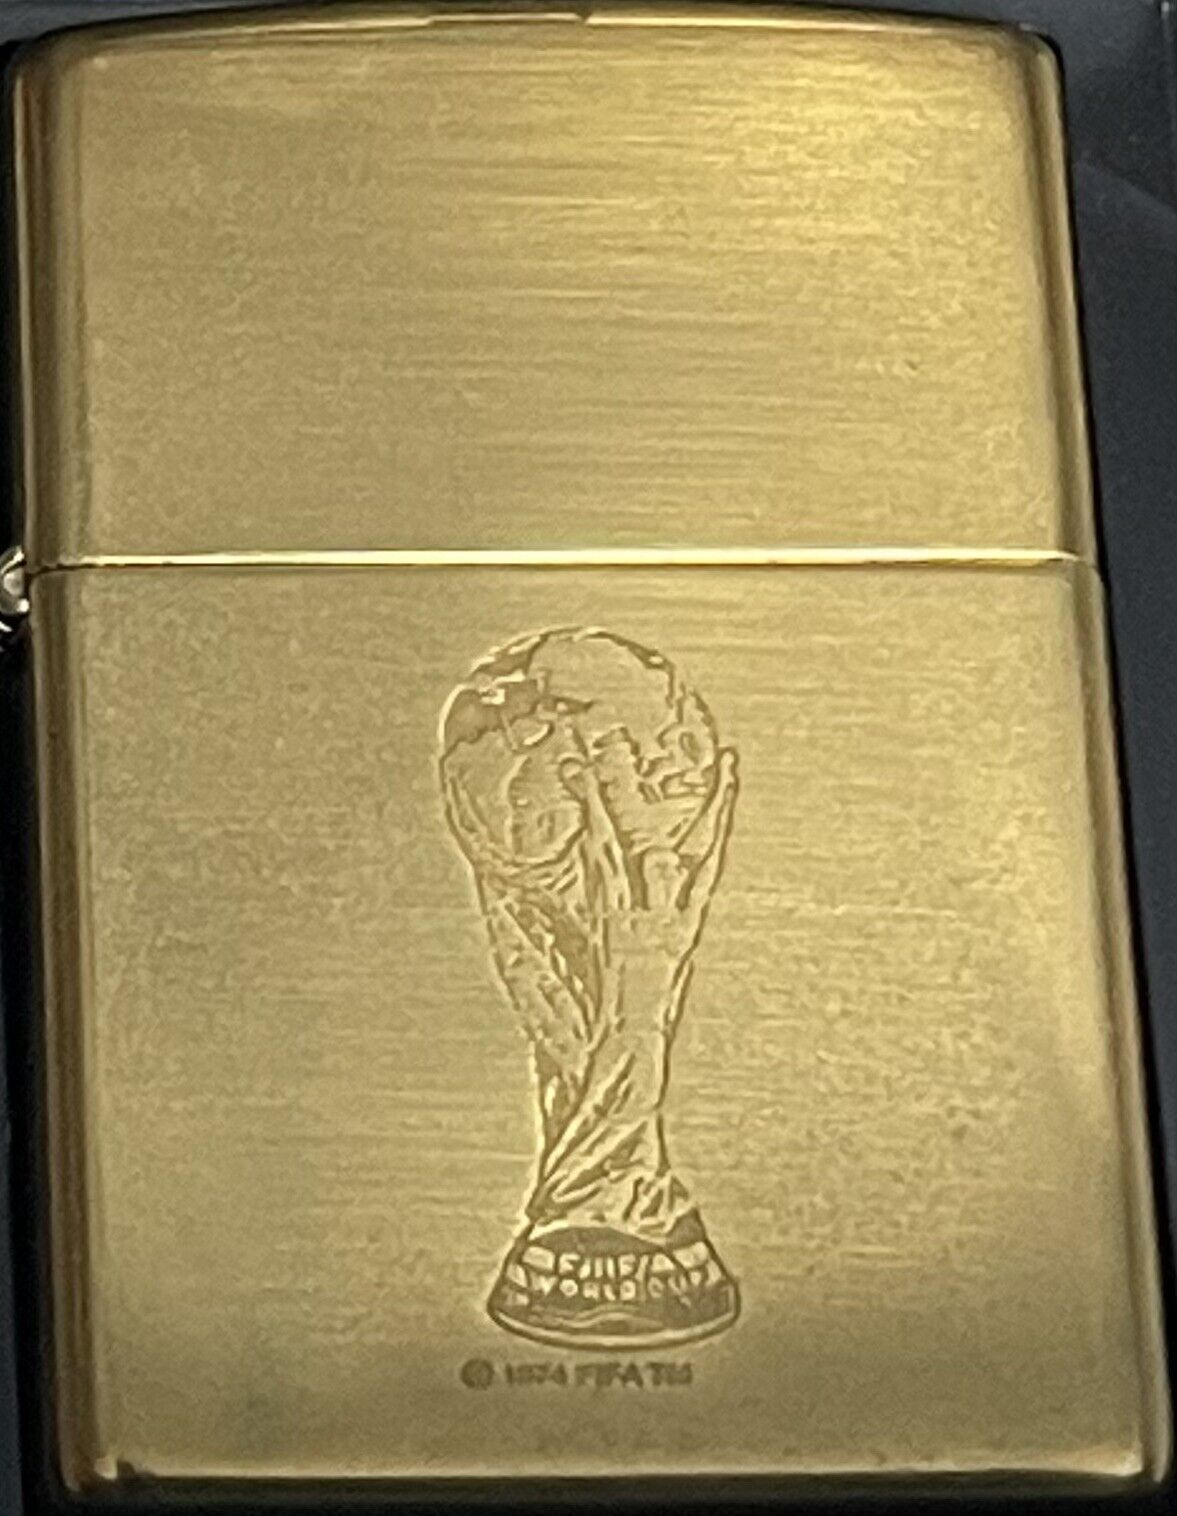 ZIPPO 1997 FIFA WORLD CUP BRASS LIGHTER SEALED IN BOX 114N